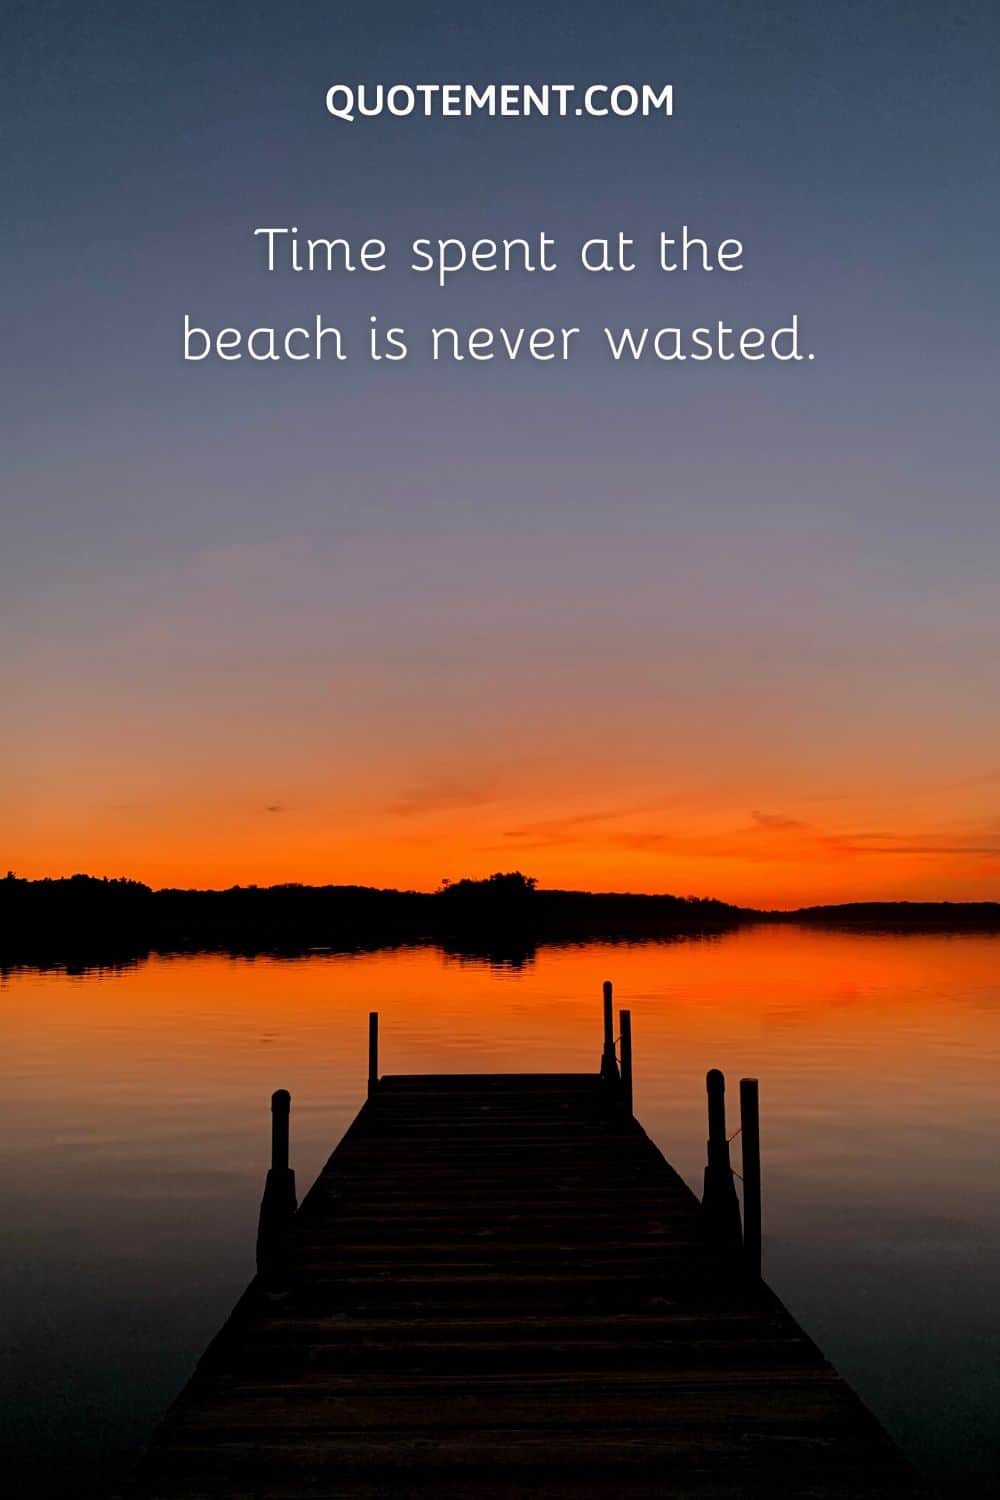 Time spent at the beach is never wasted.